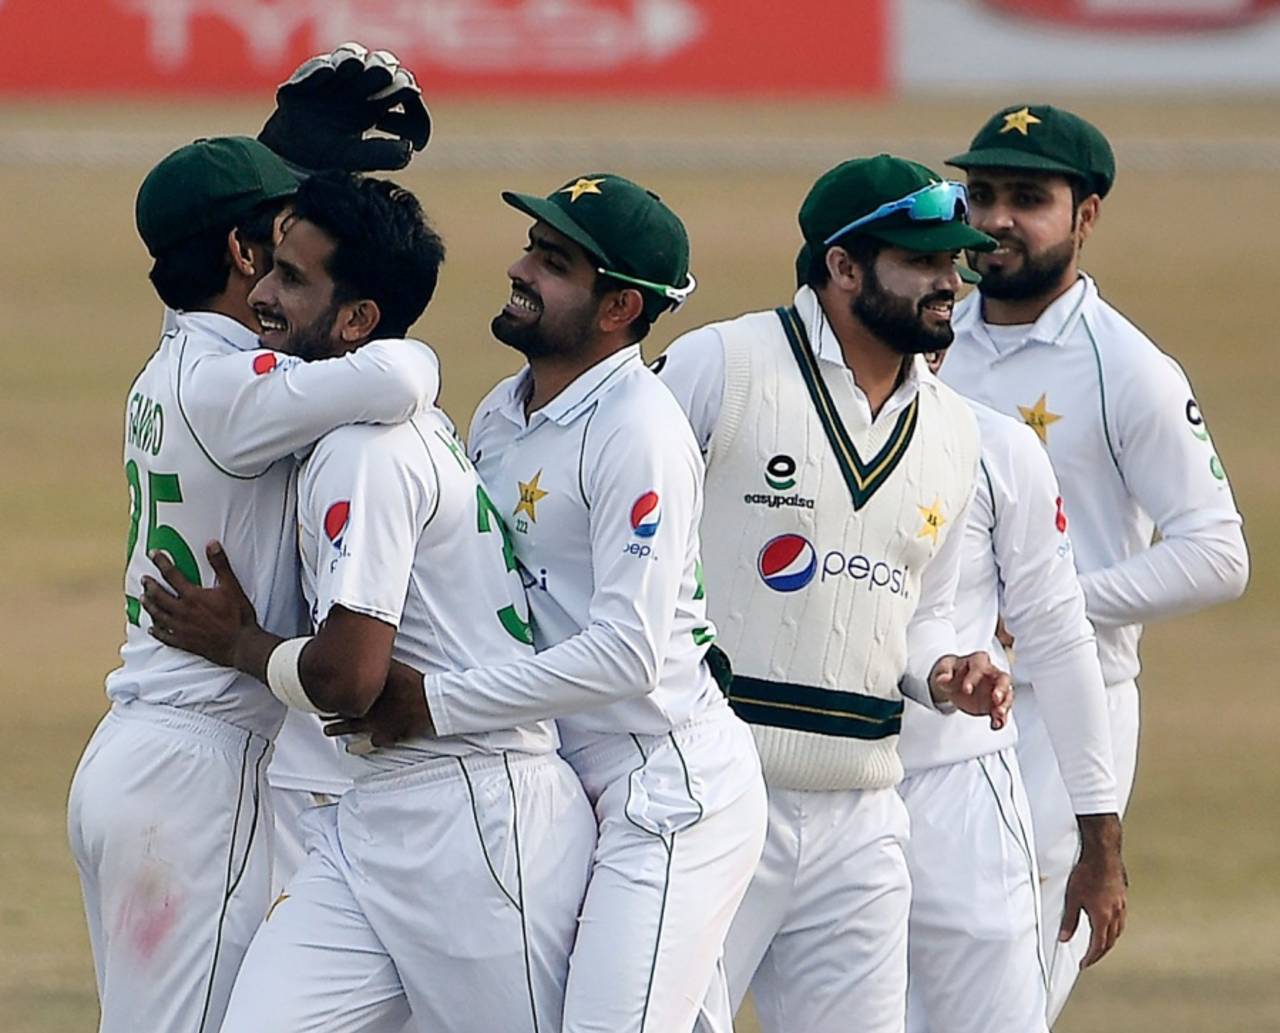 Hasan Ali celebrates a wicket with his team-mates, Pakistan vs South Africa, 2nd Test, Rawalpindi, 5th day, February 8, 2021